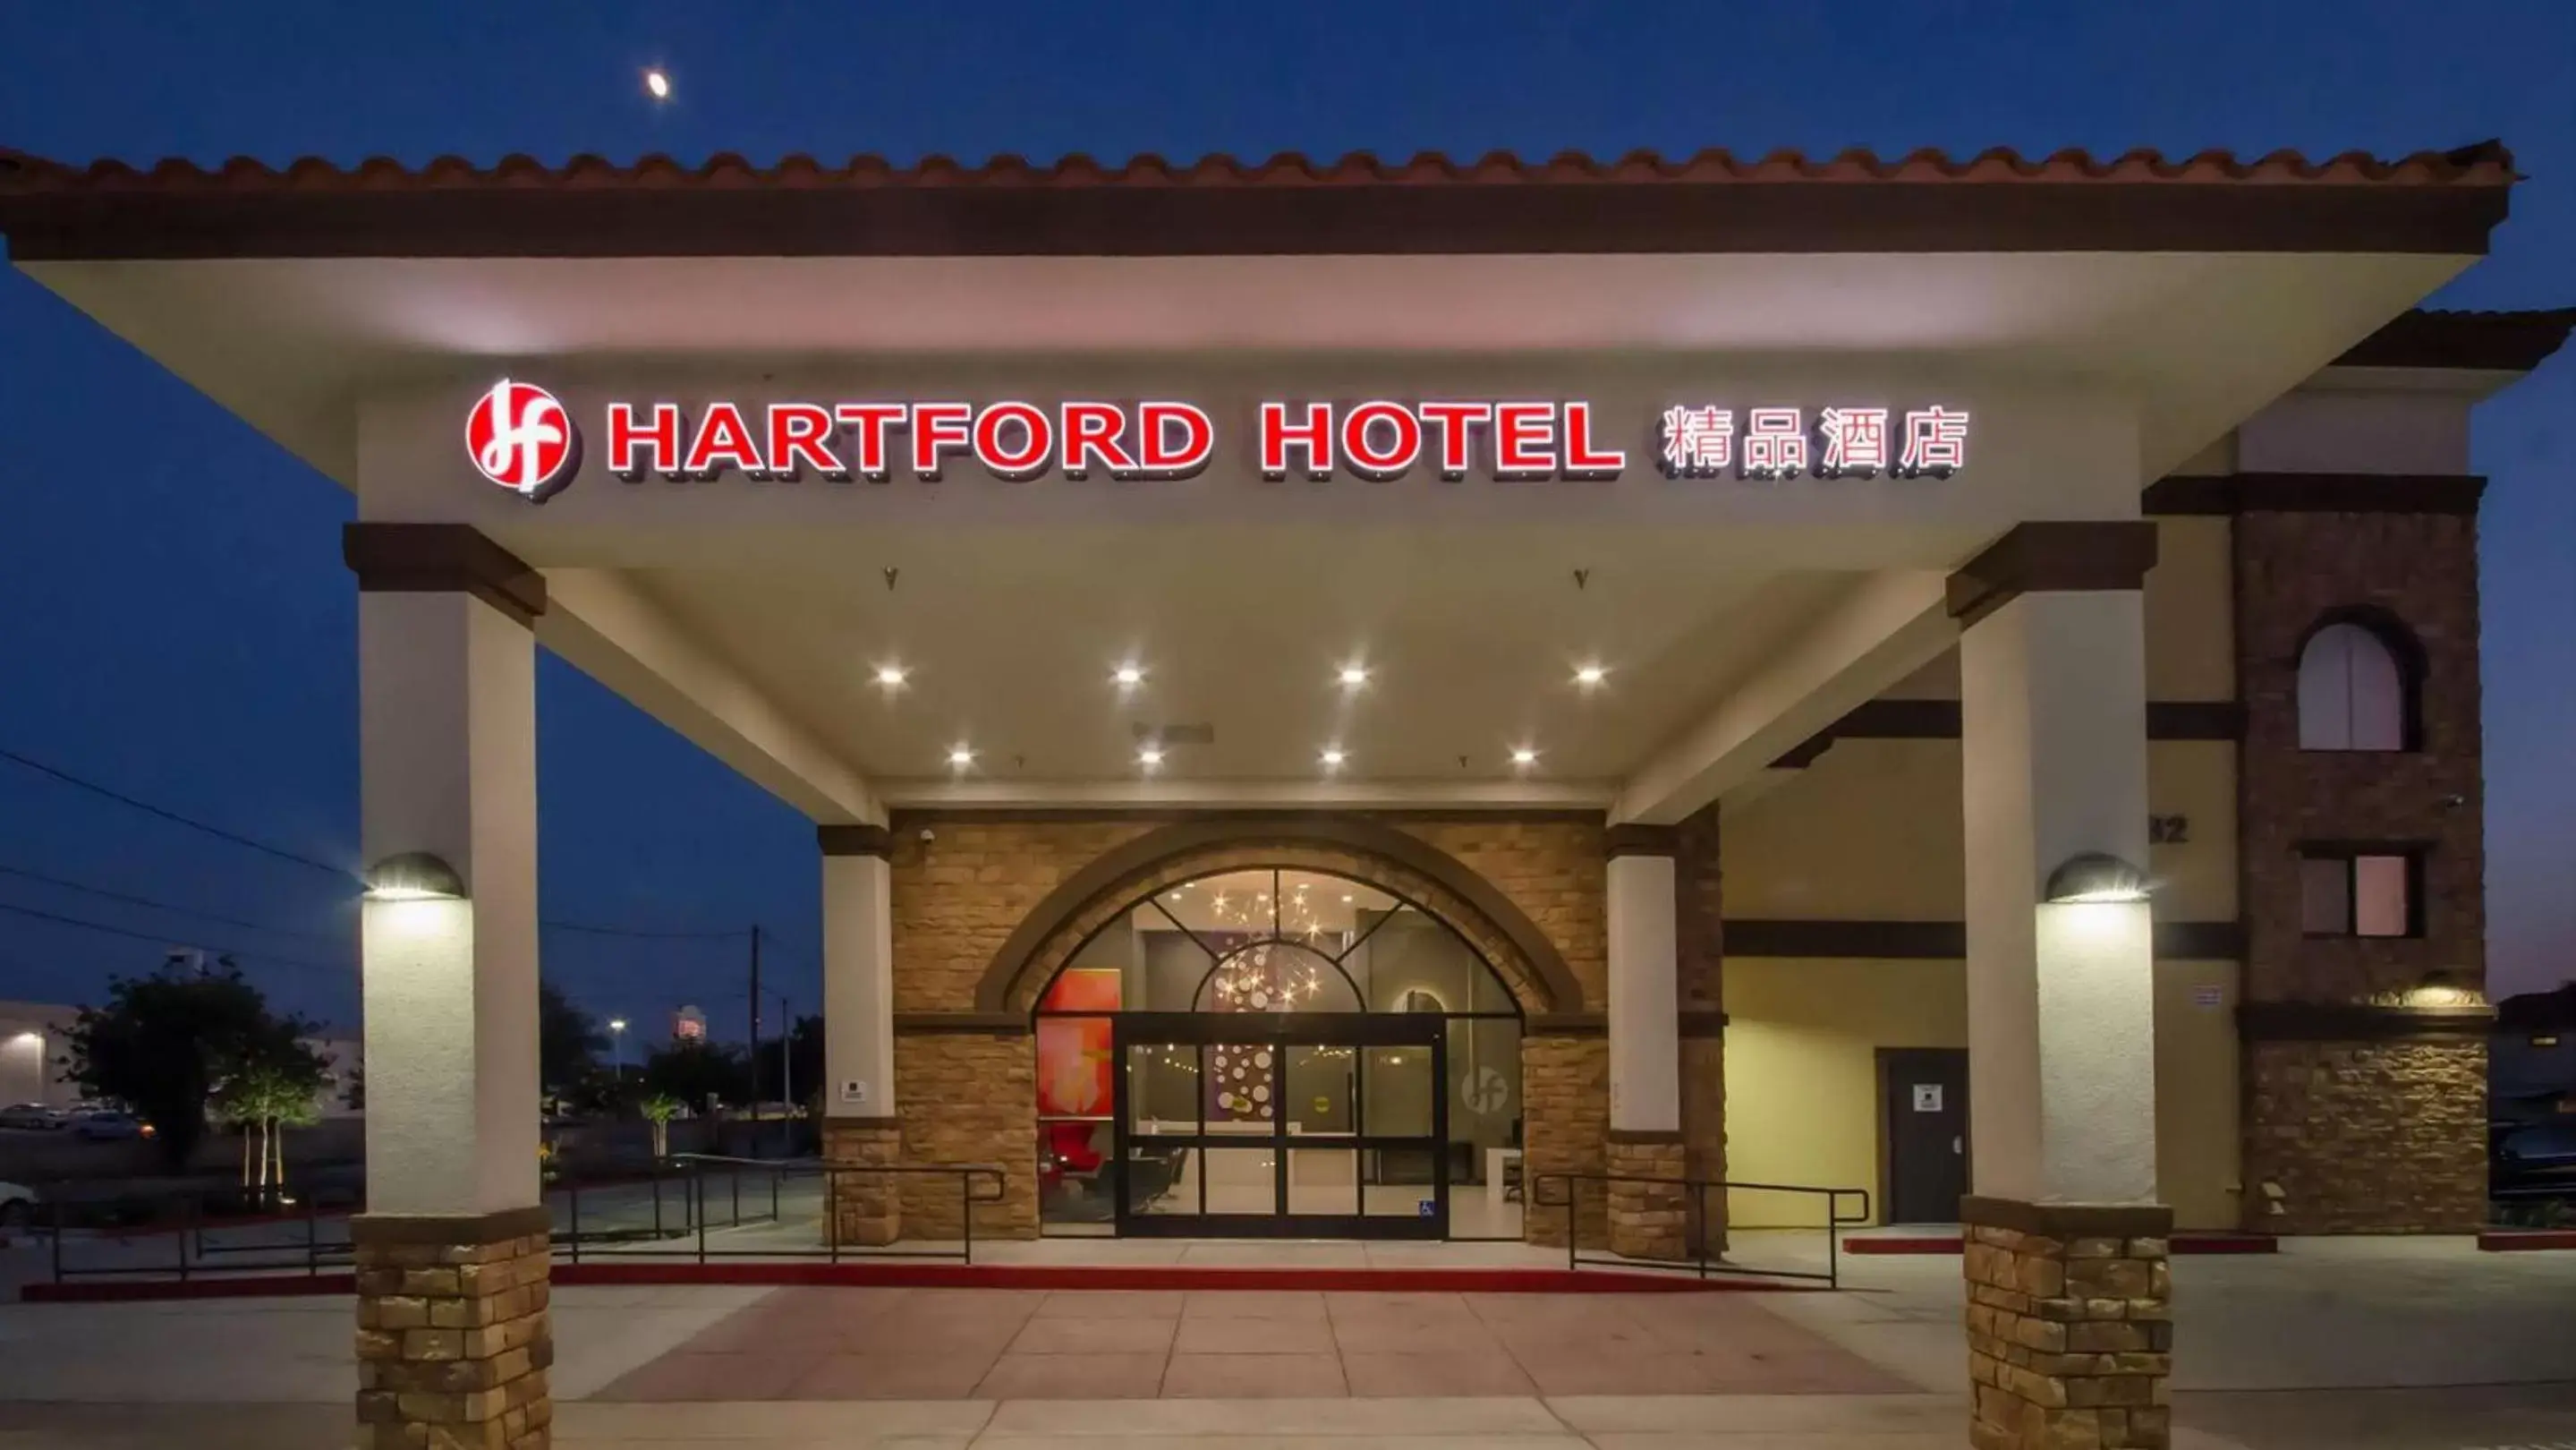 Property building in Hartford Hotel Best Western Signature Collection